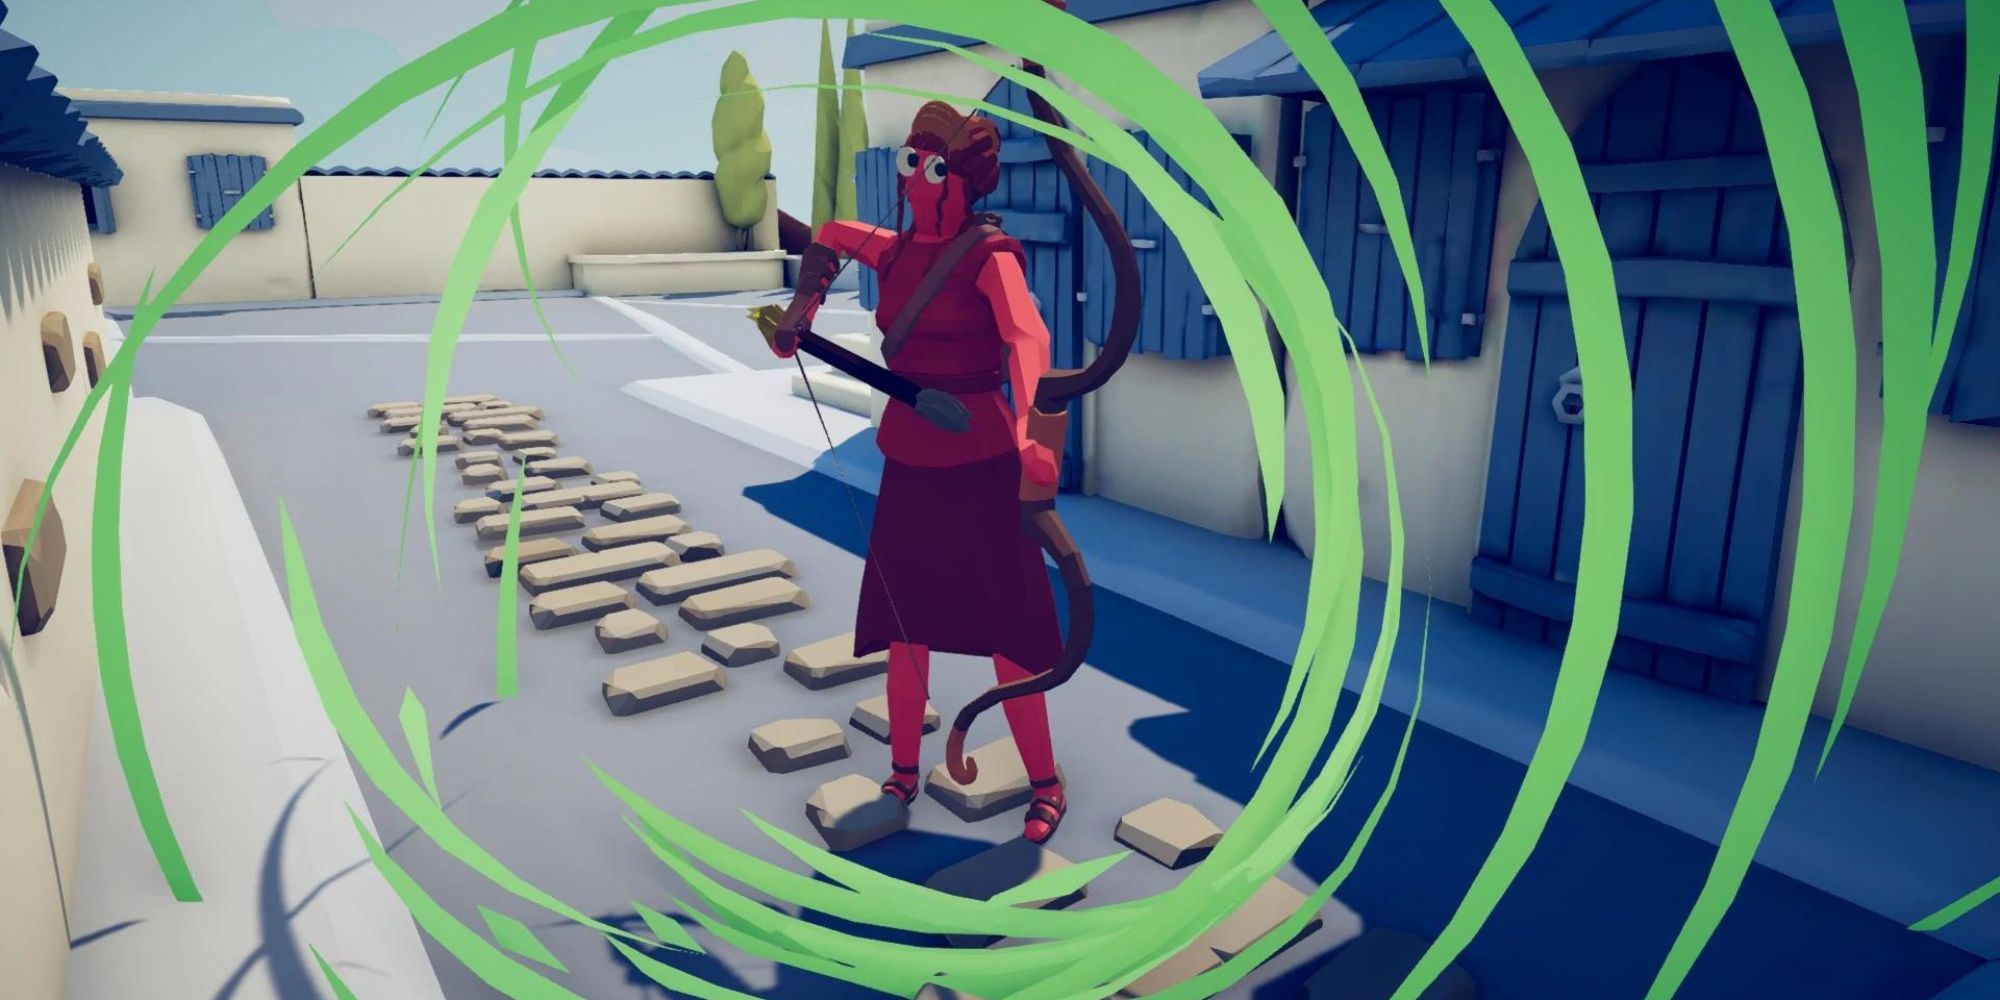 Artemis shooting their bow in Totally Accurate Battle Simulator